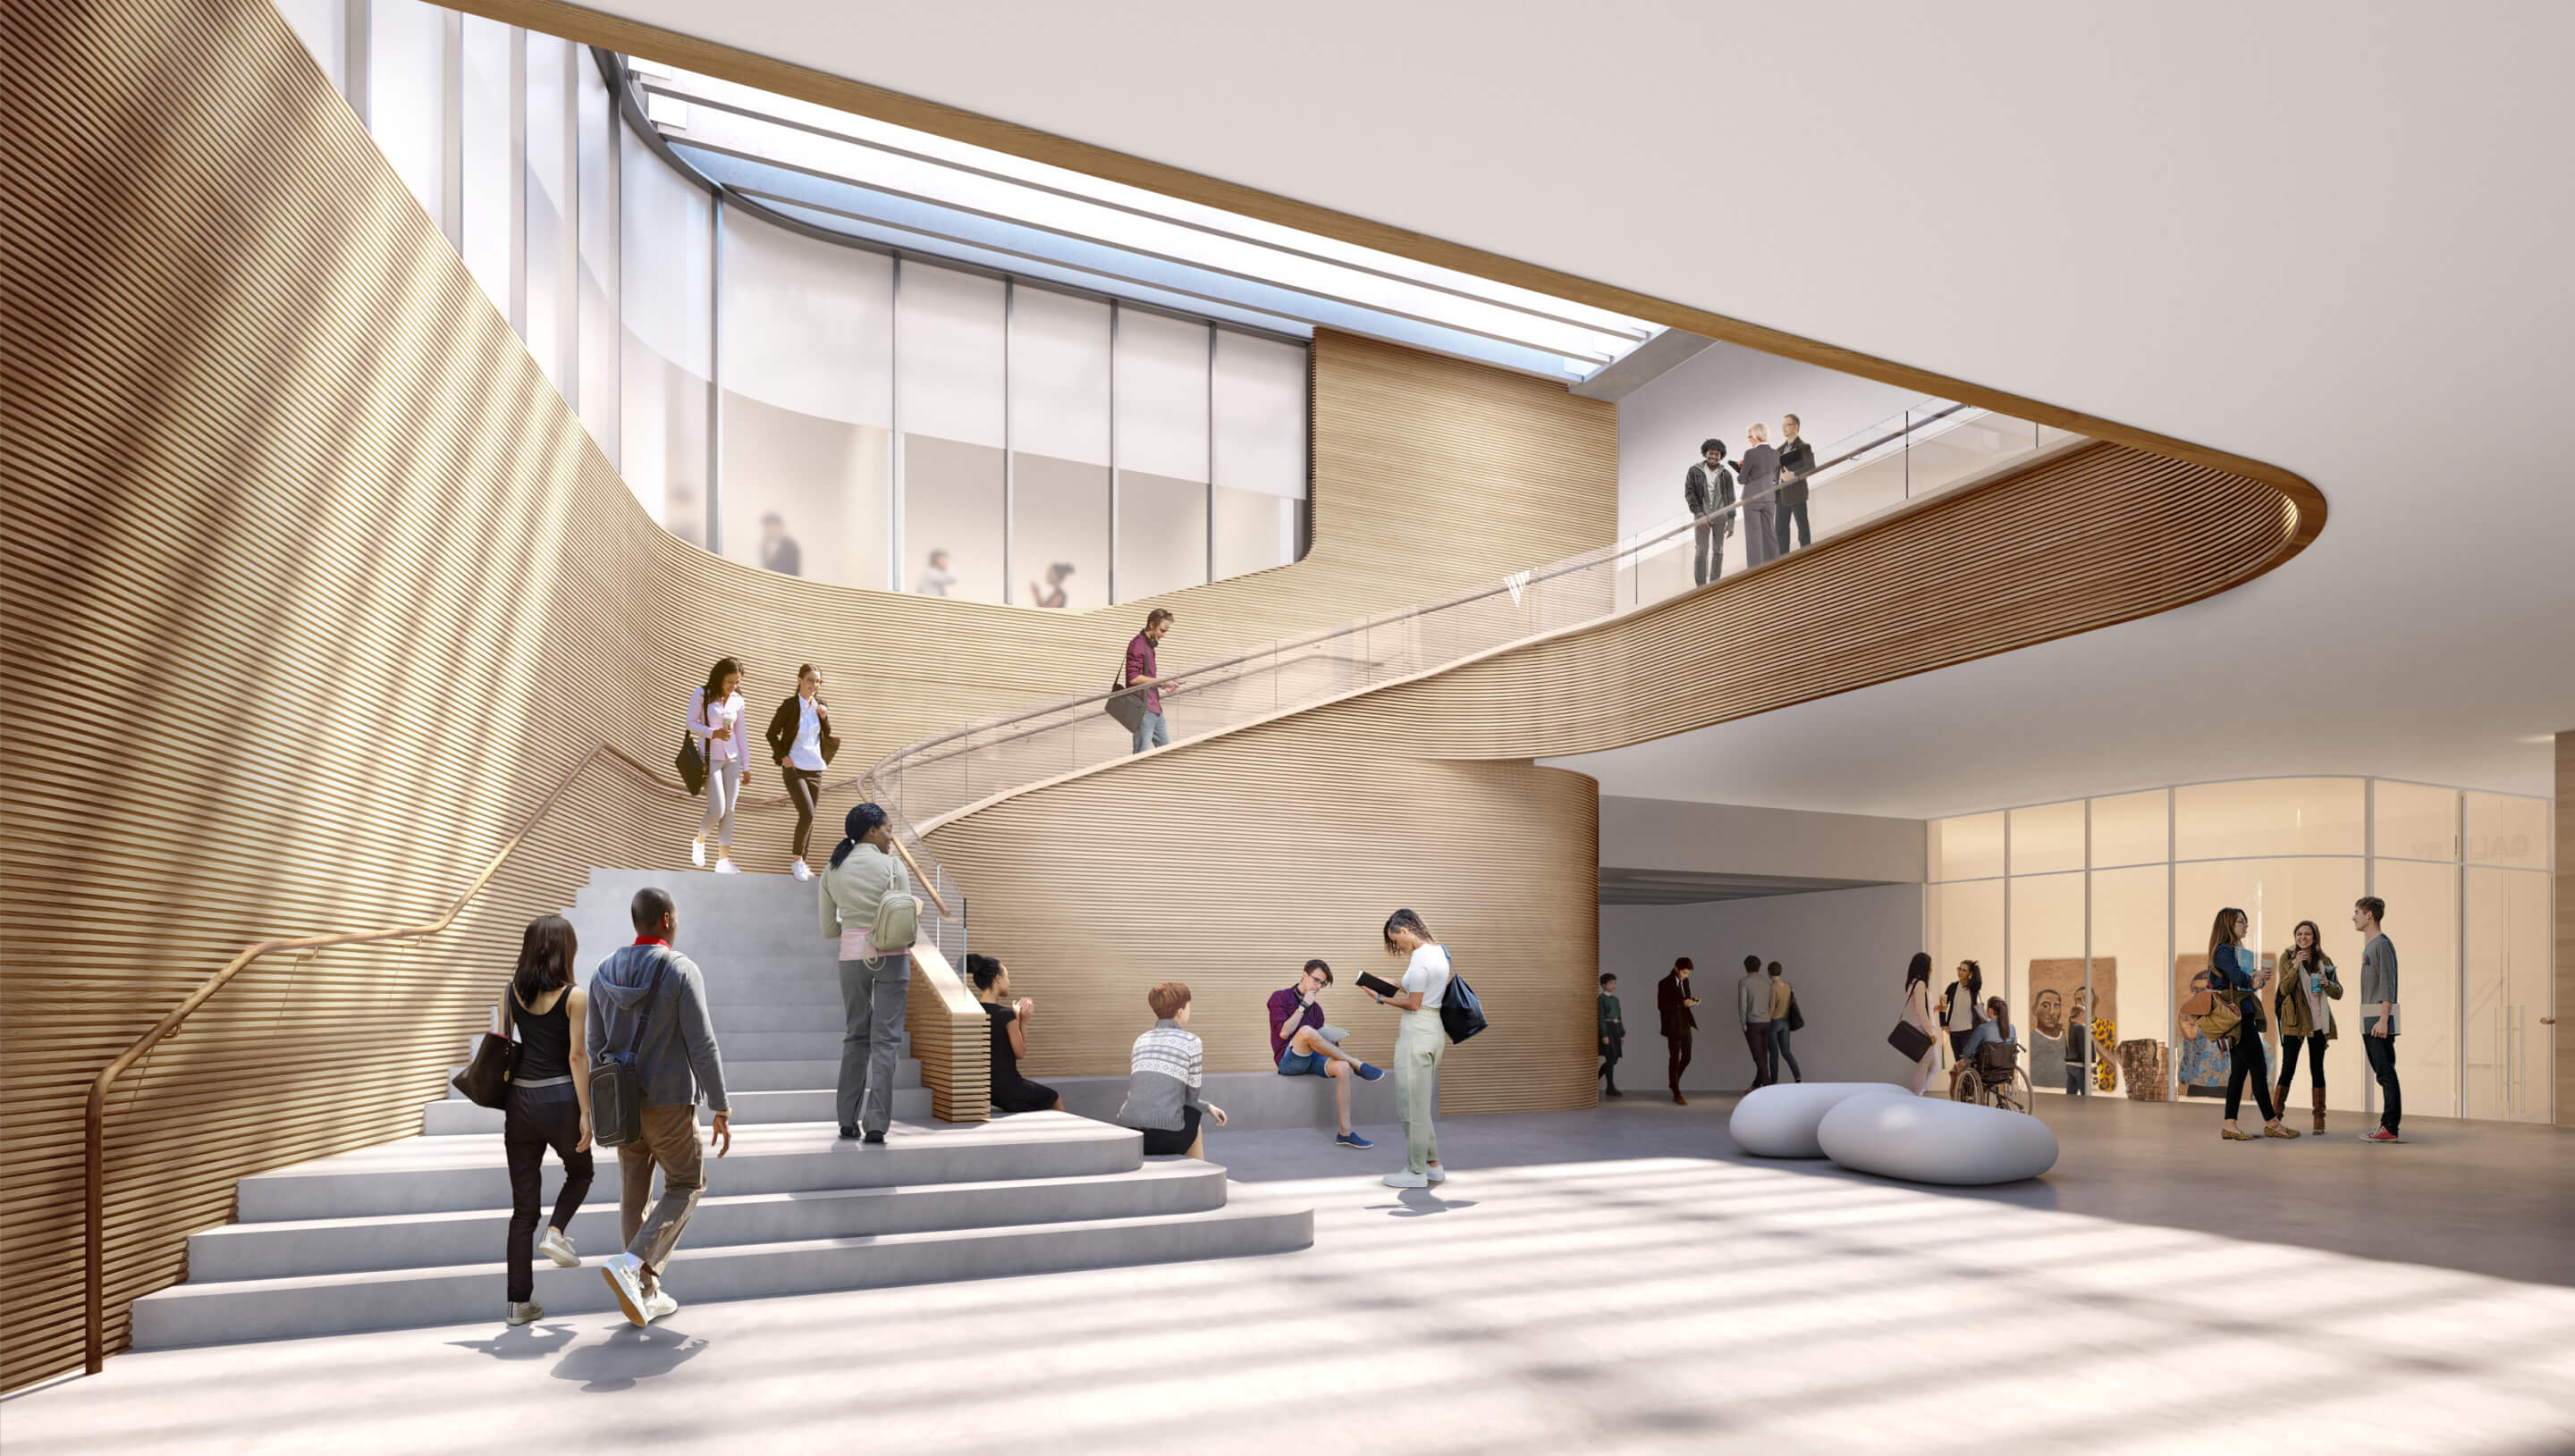 rendering of a grand staircase in an arts center